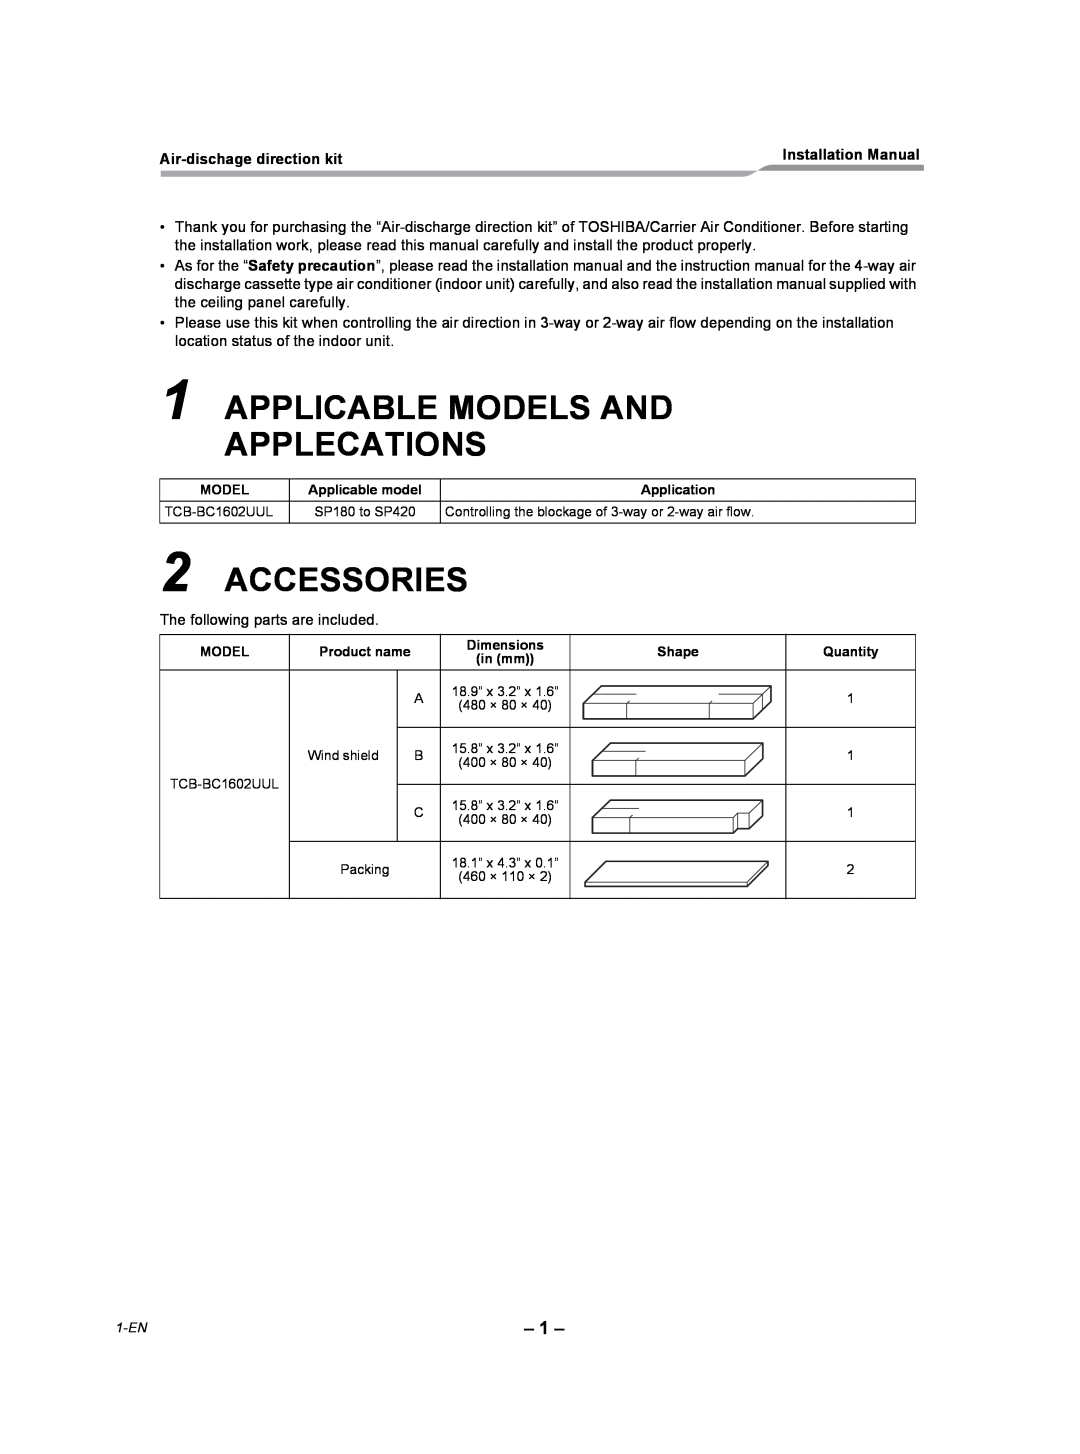 Toshiba TCB-BC1602UUL installation manual Applicable Models And Applecations, Accessories, Air-dischagedirection kit 